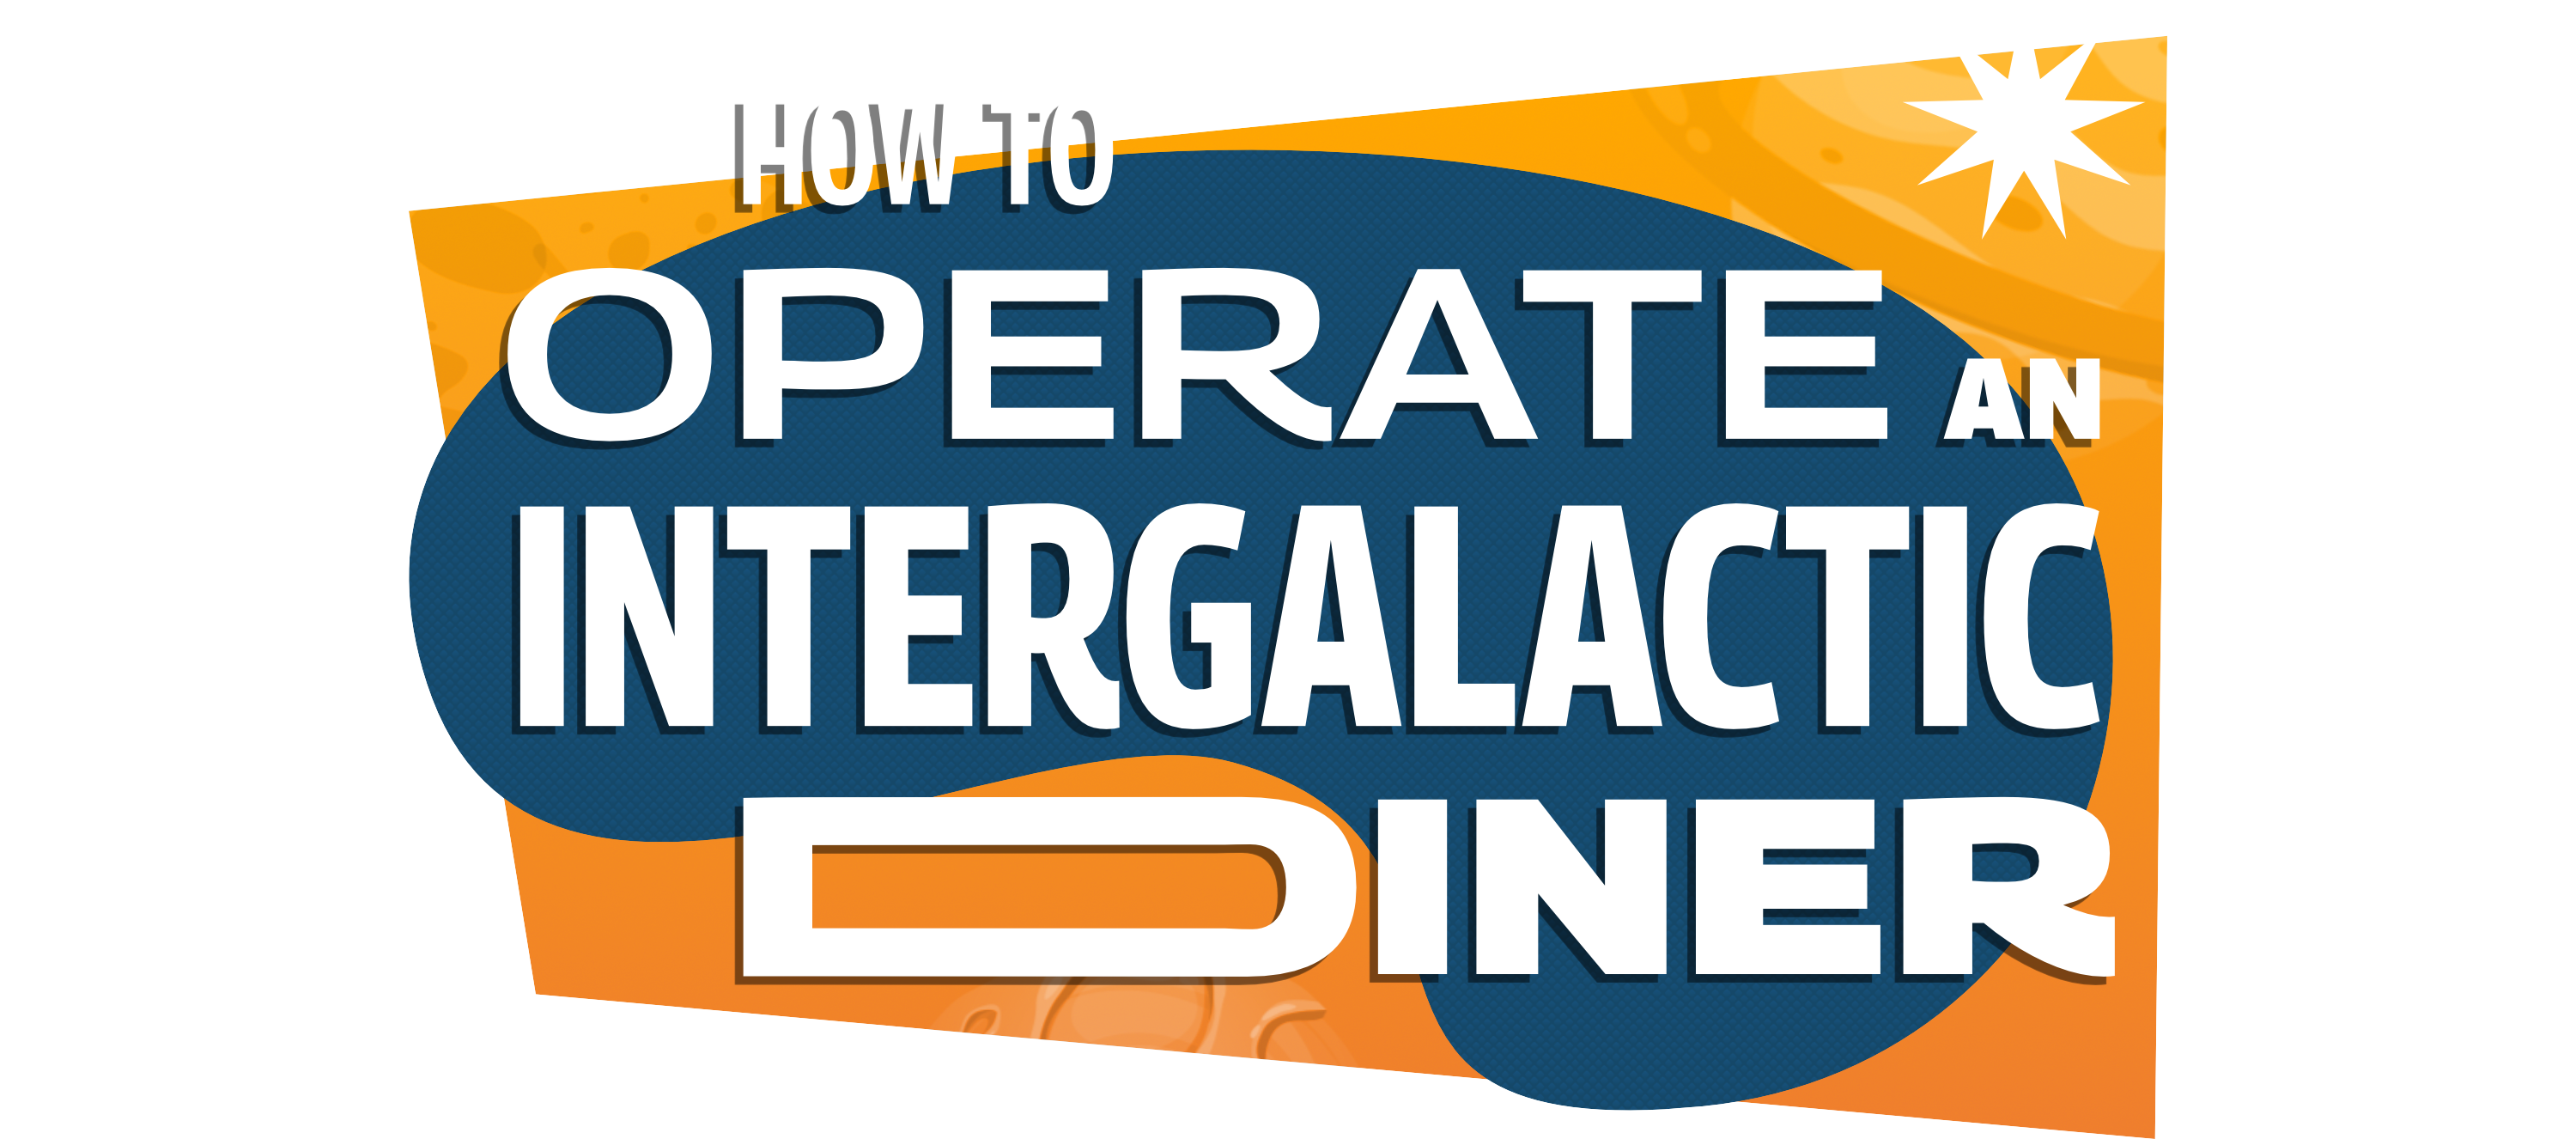 How to Operate an Intergalactic Diner